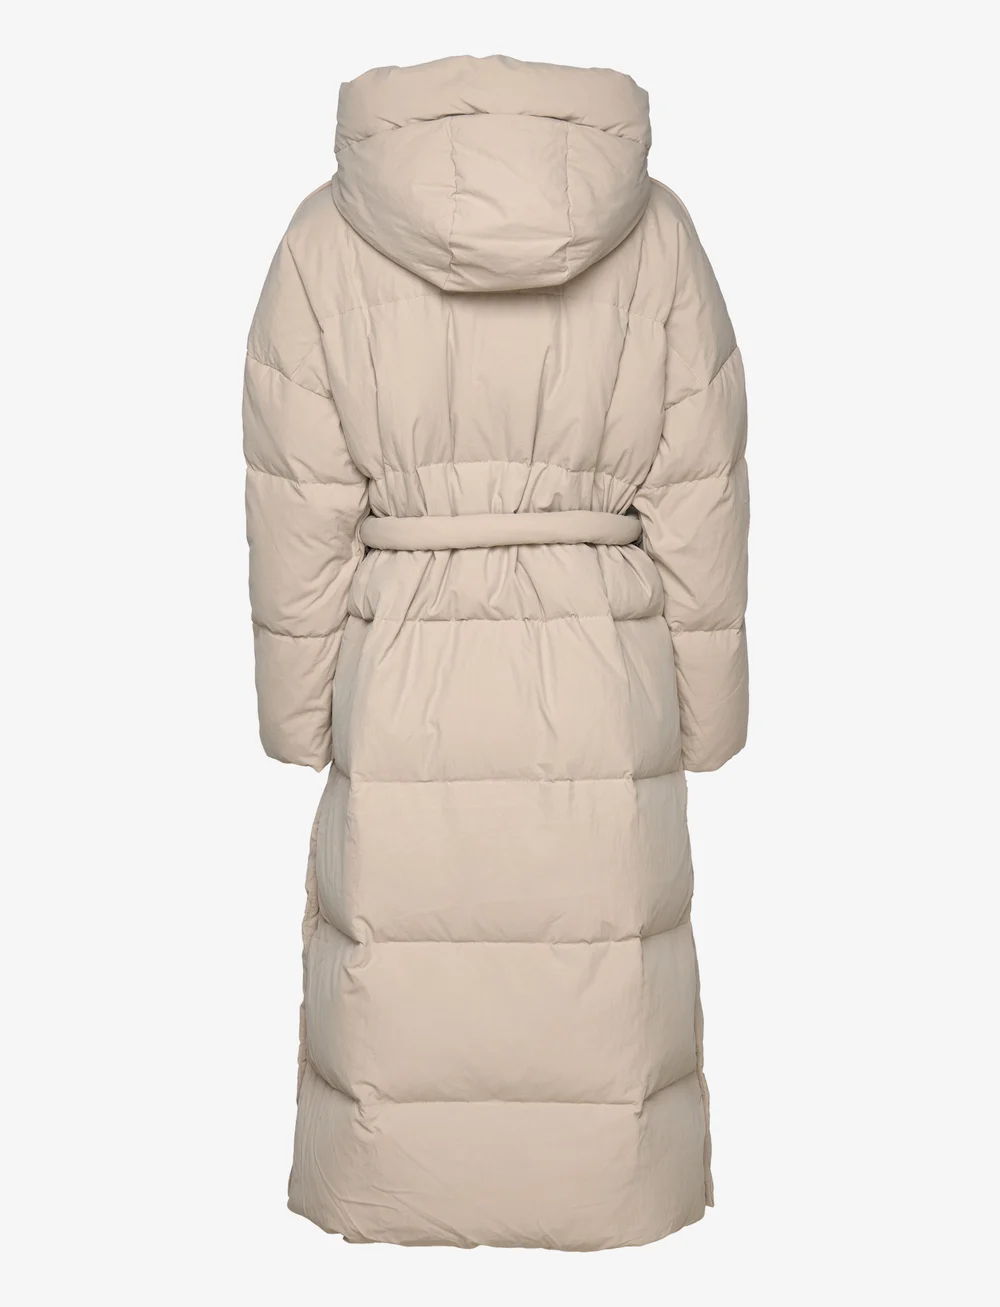 Esprit Casual Long Puffer Coat - 249 €. Buy Padded Coats from Esprit Casual  online at . Fast delivery and easy returns